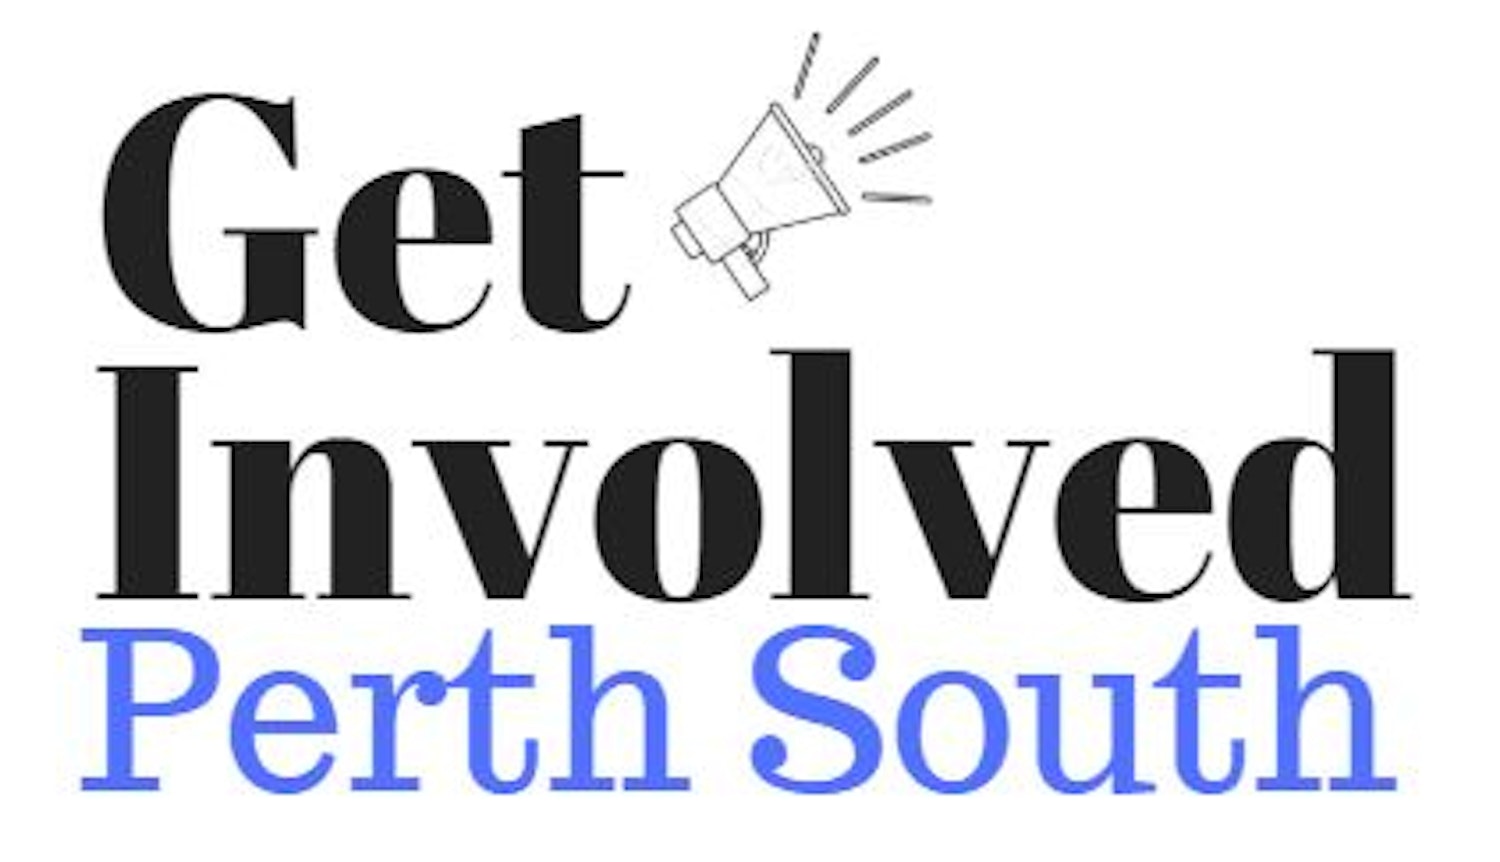 Get Involved Perth South